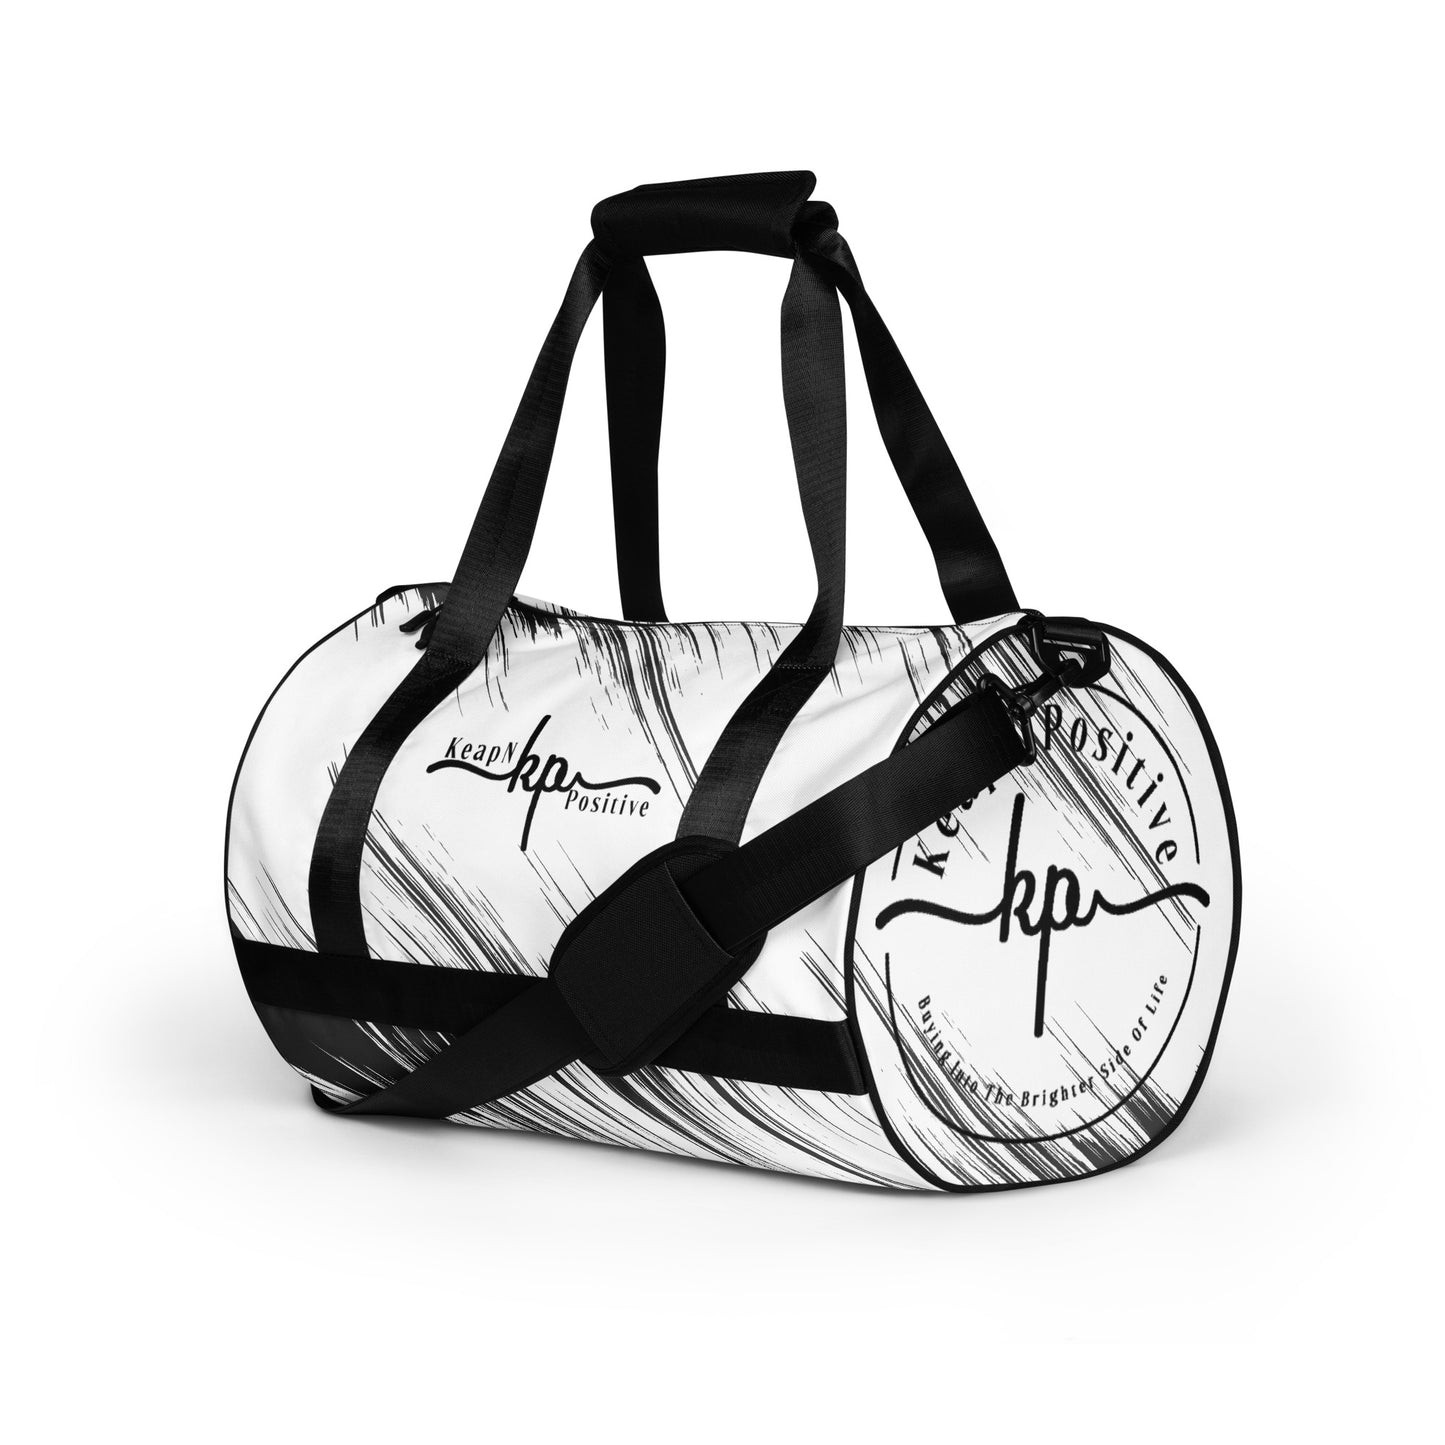 Day Duffle w/All-over print, White & Black KP